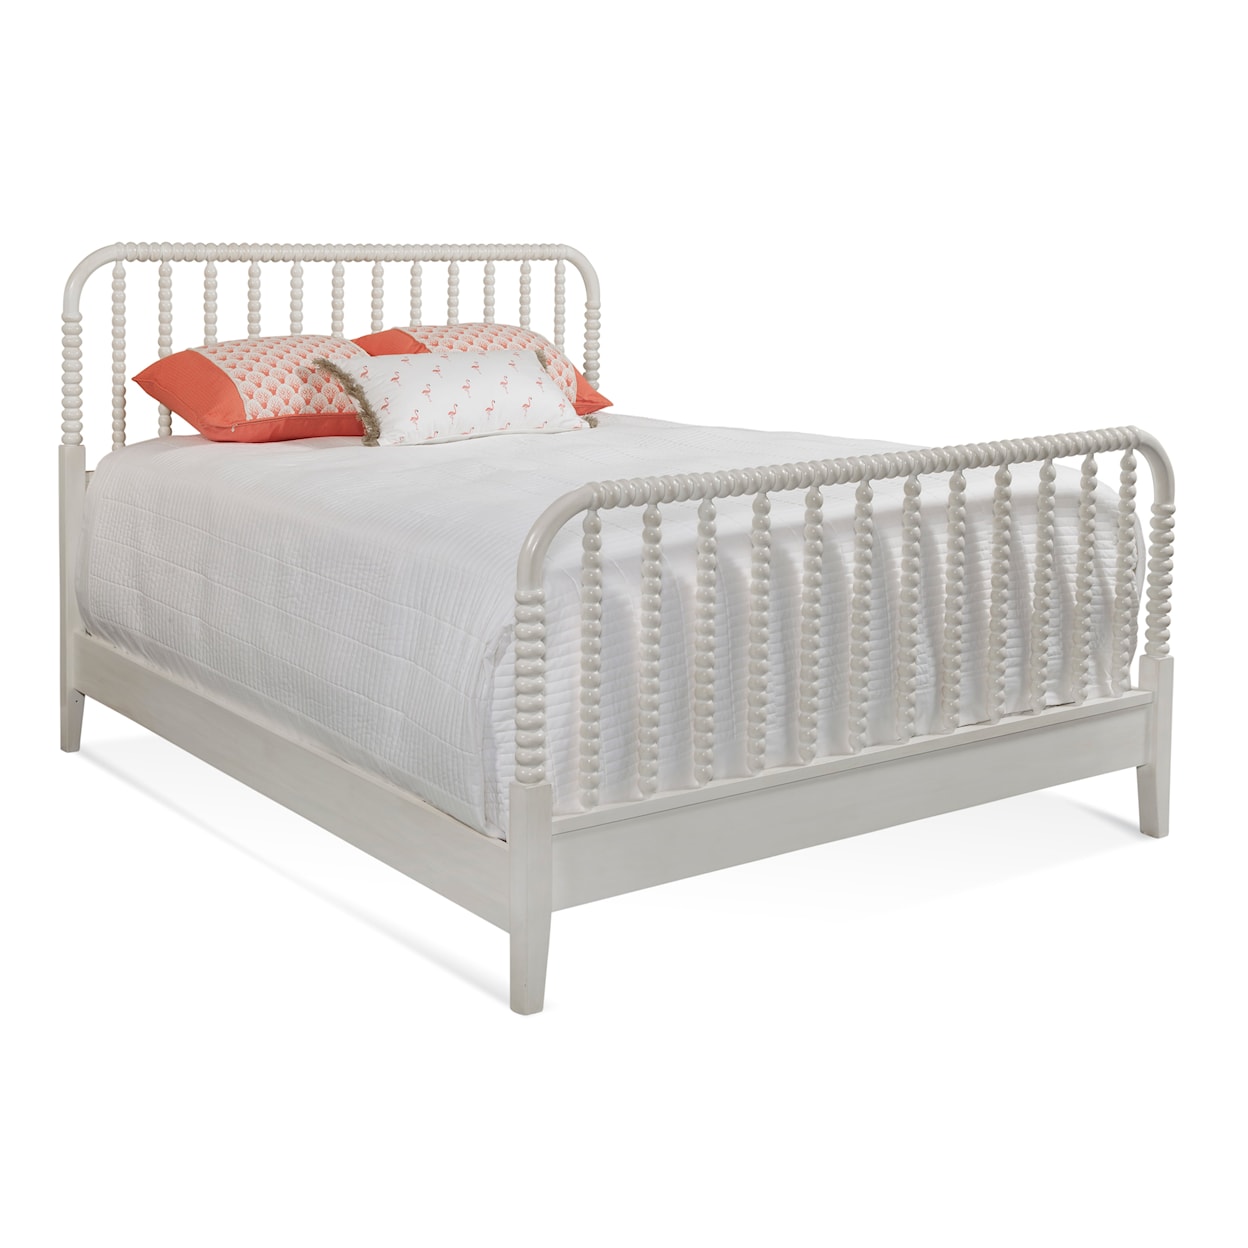 Braxton Culler Lind Island Lind Island Spindle Bed